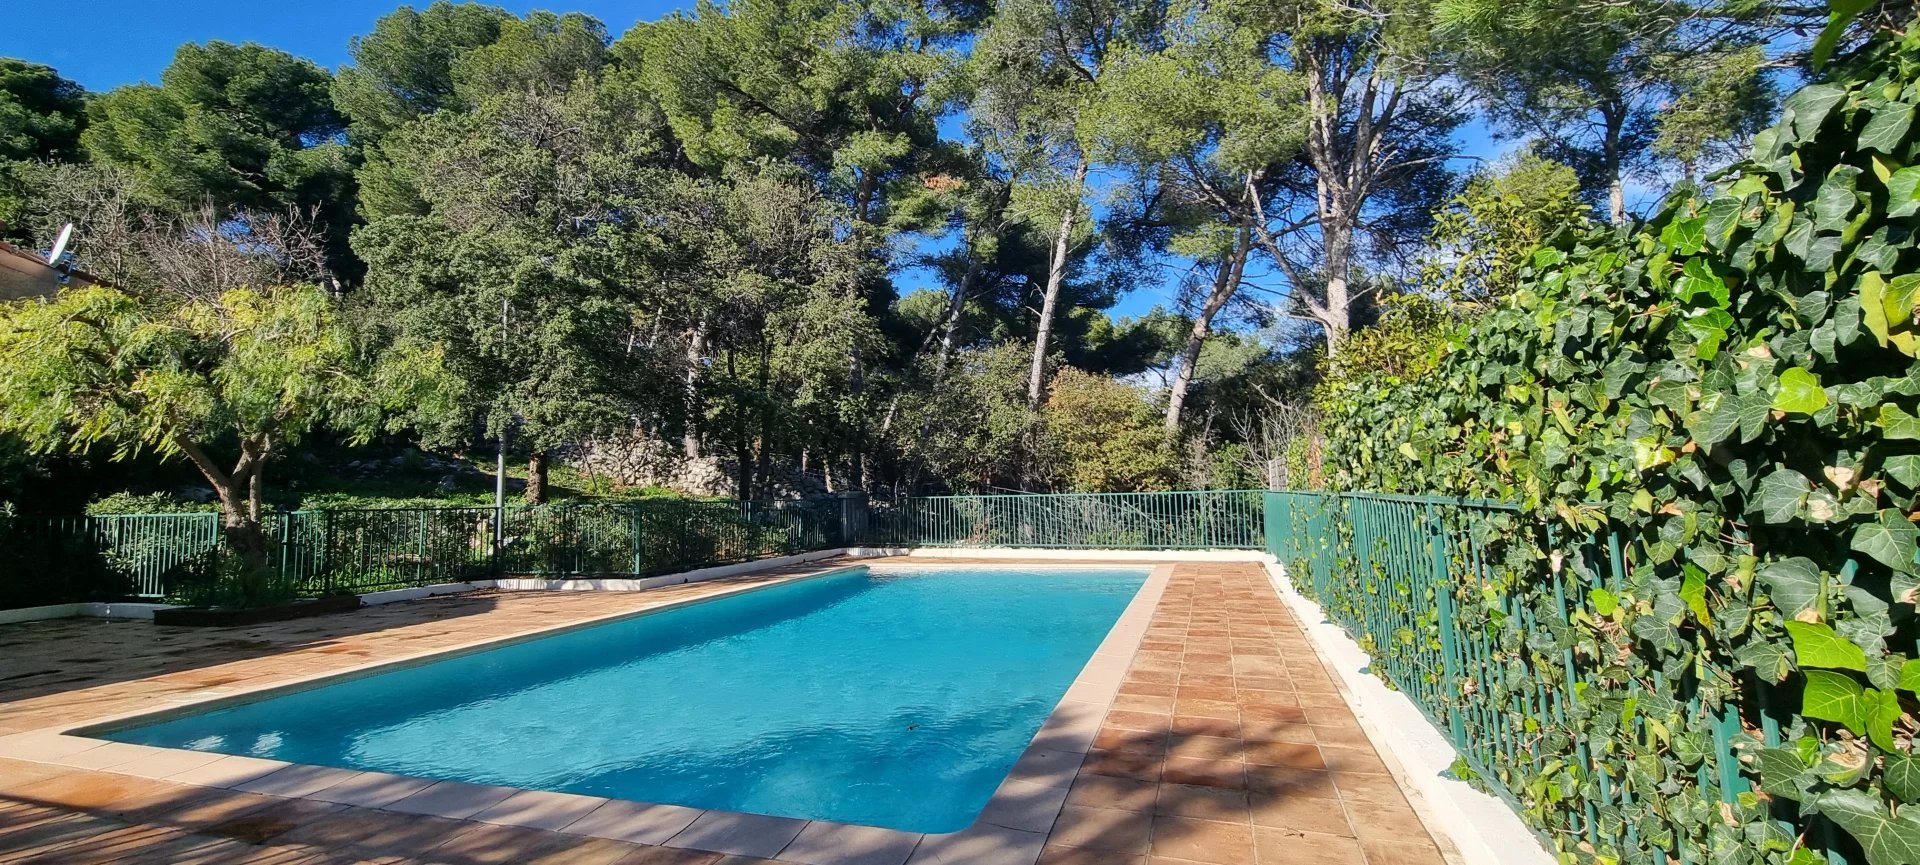 Charming 2-Room House with Sea View, Shared Pool, and Peaceful Setting in Vallauris